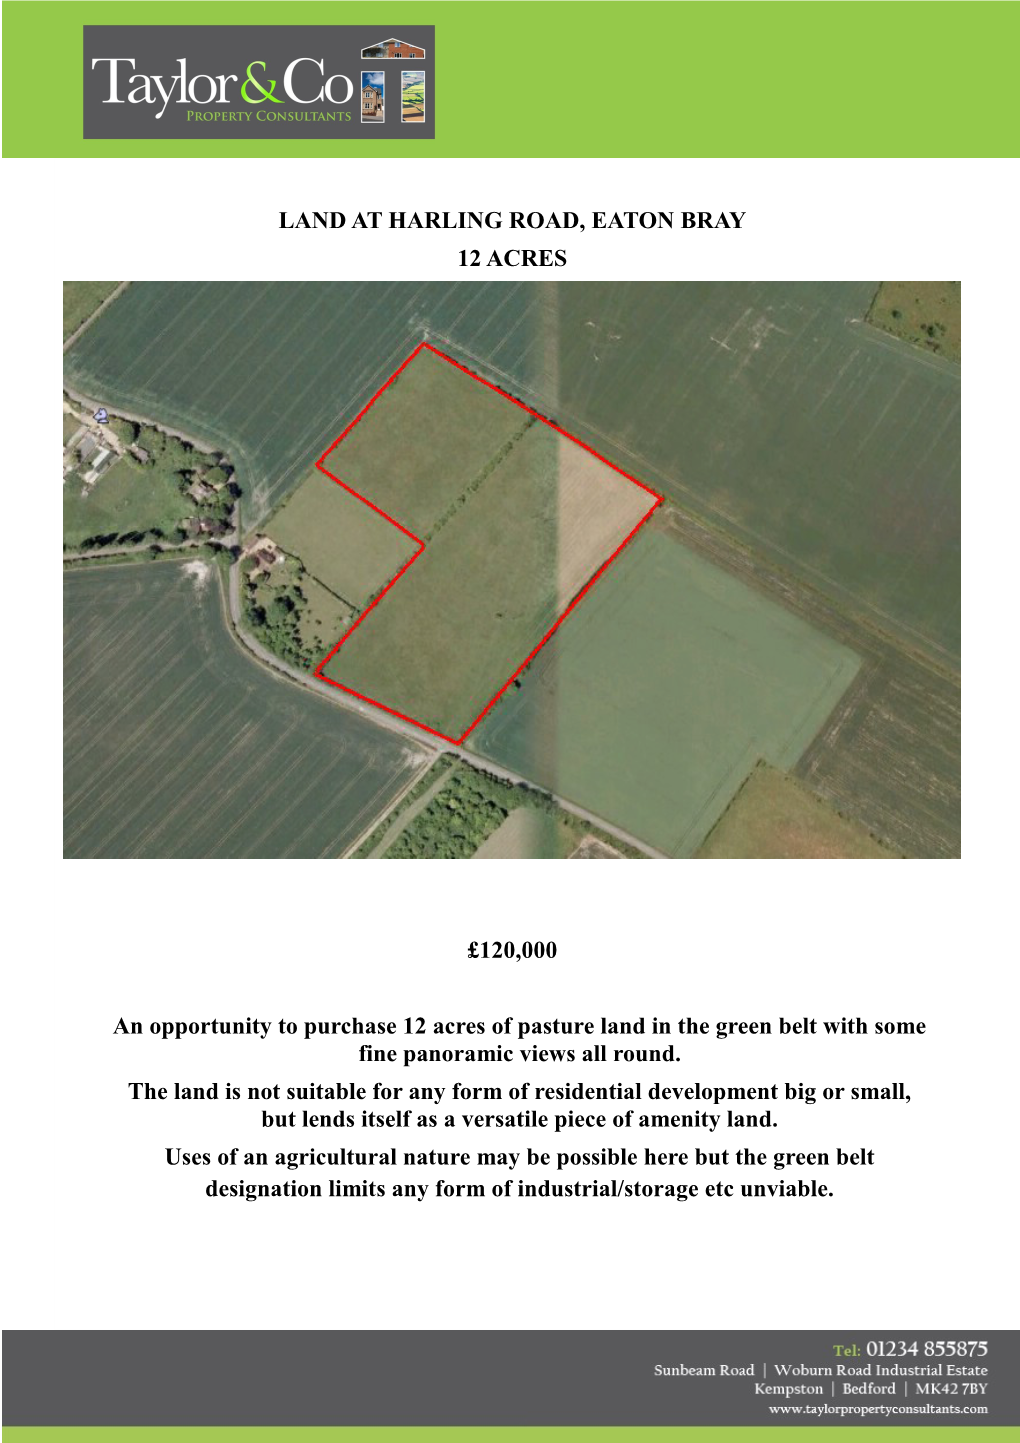 LAND at HARLING ROAD, EATON BRAY 12 ACRES £120,000 an Opportunity to Purchase 12 Acres of Pasture Land in the Green Belt with S